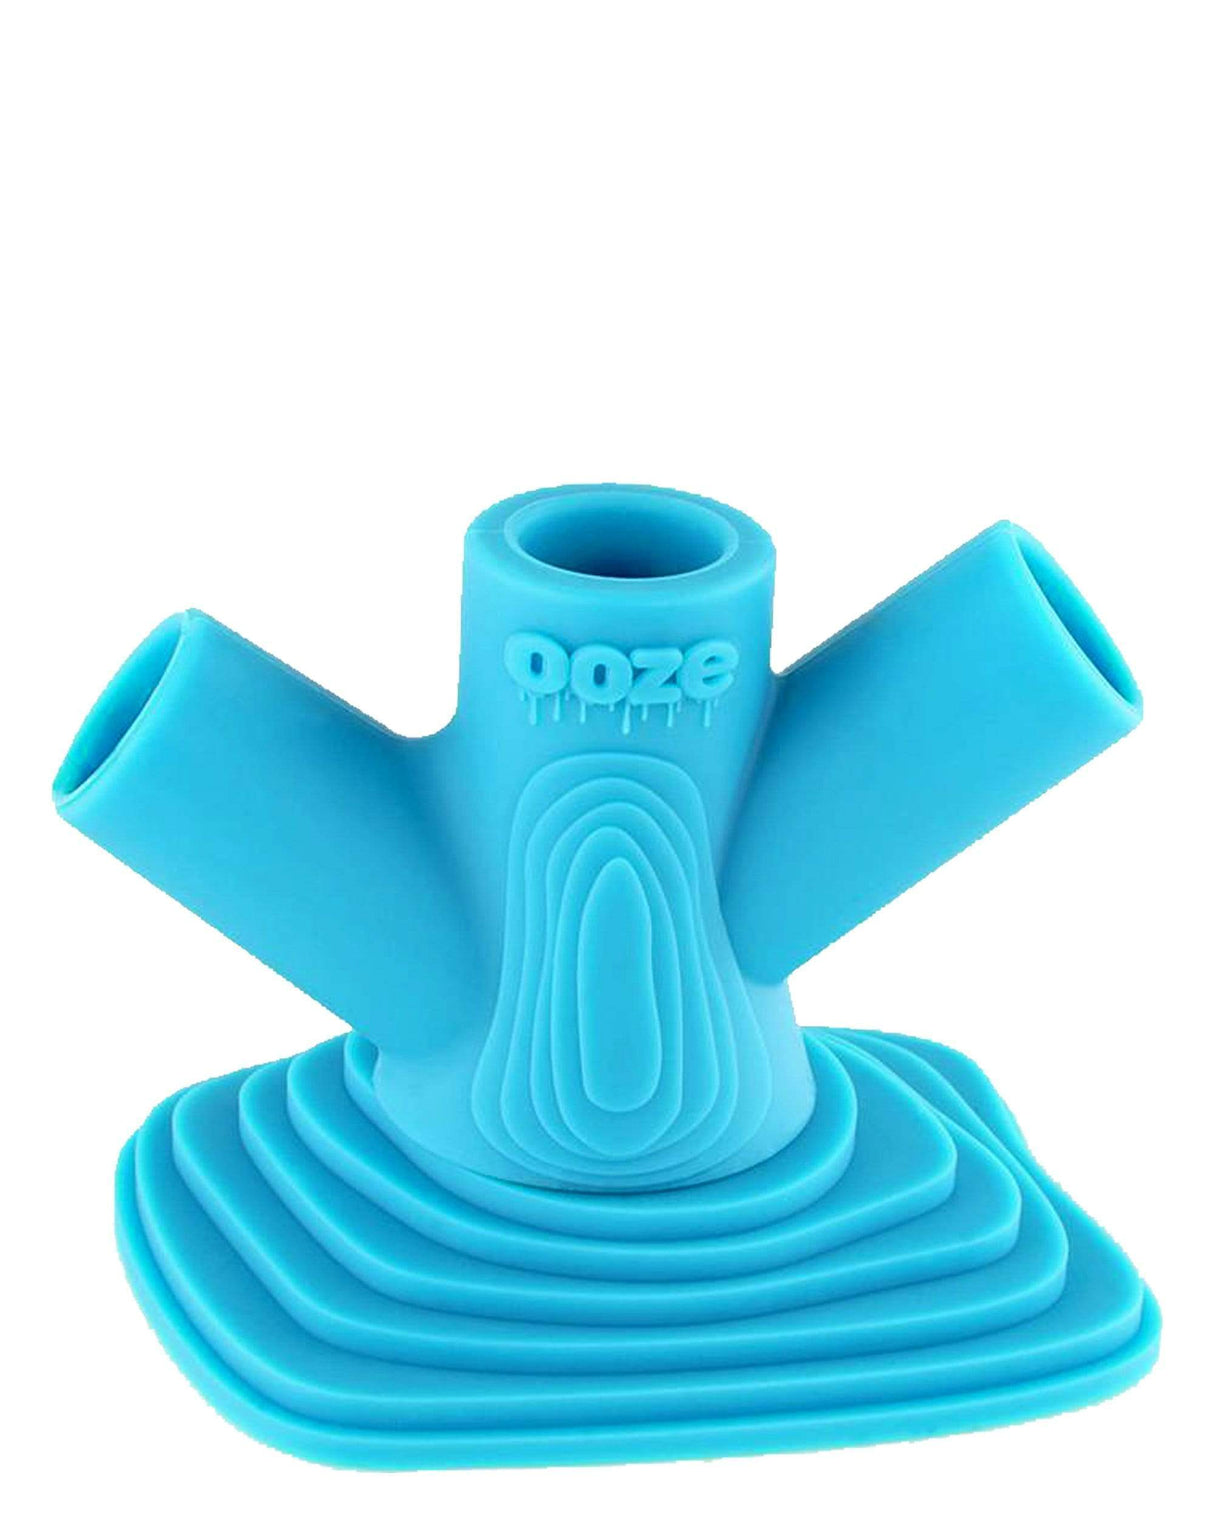 Ooze Banger Hanger Silicone Stand in Teal, Front View, for 14mm & 19mm Joints, Durable & Portable